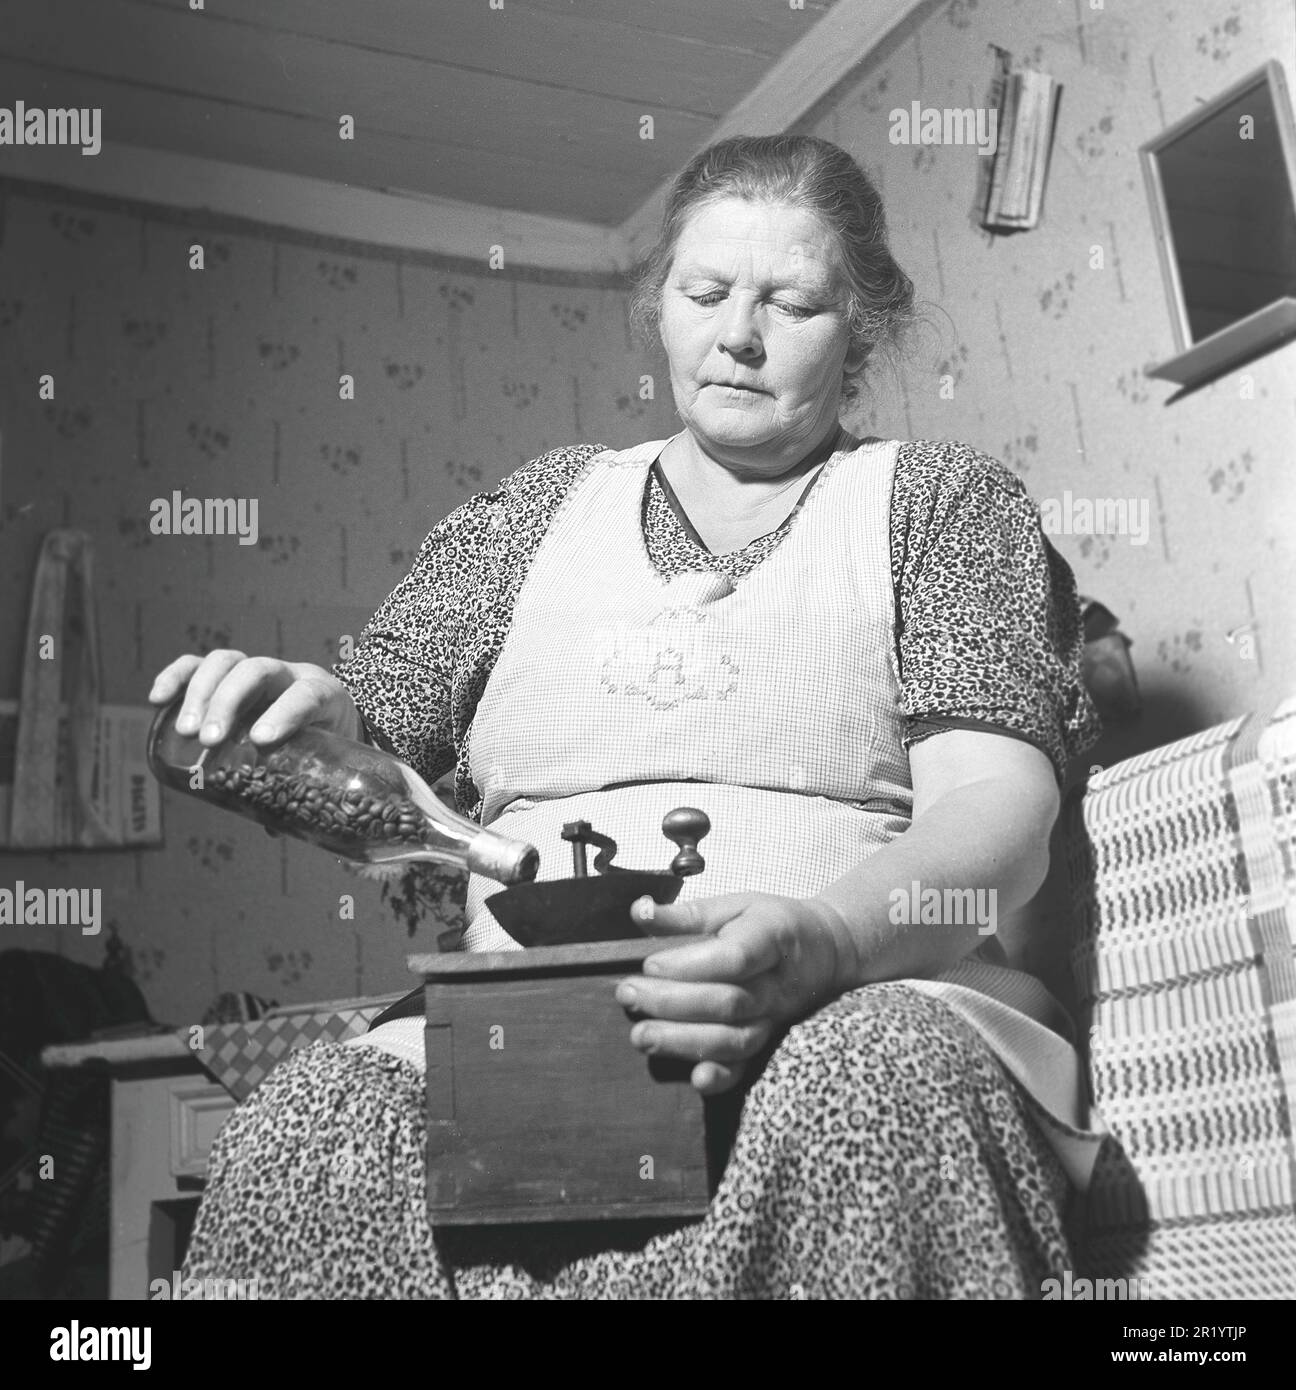 Grinding coffee in the 1940s. Mrs. Anna Karlsten grinds coffee beans manually in a coffee grinder. Coffee was at this time during the time of world war II very scarse and expensive, and rationed. She stores them in a glass bottle and pours them in to start. Sweden 1942. Kristoffersson ref 226-17 Stock Photo